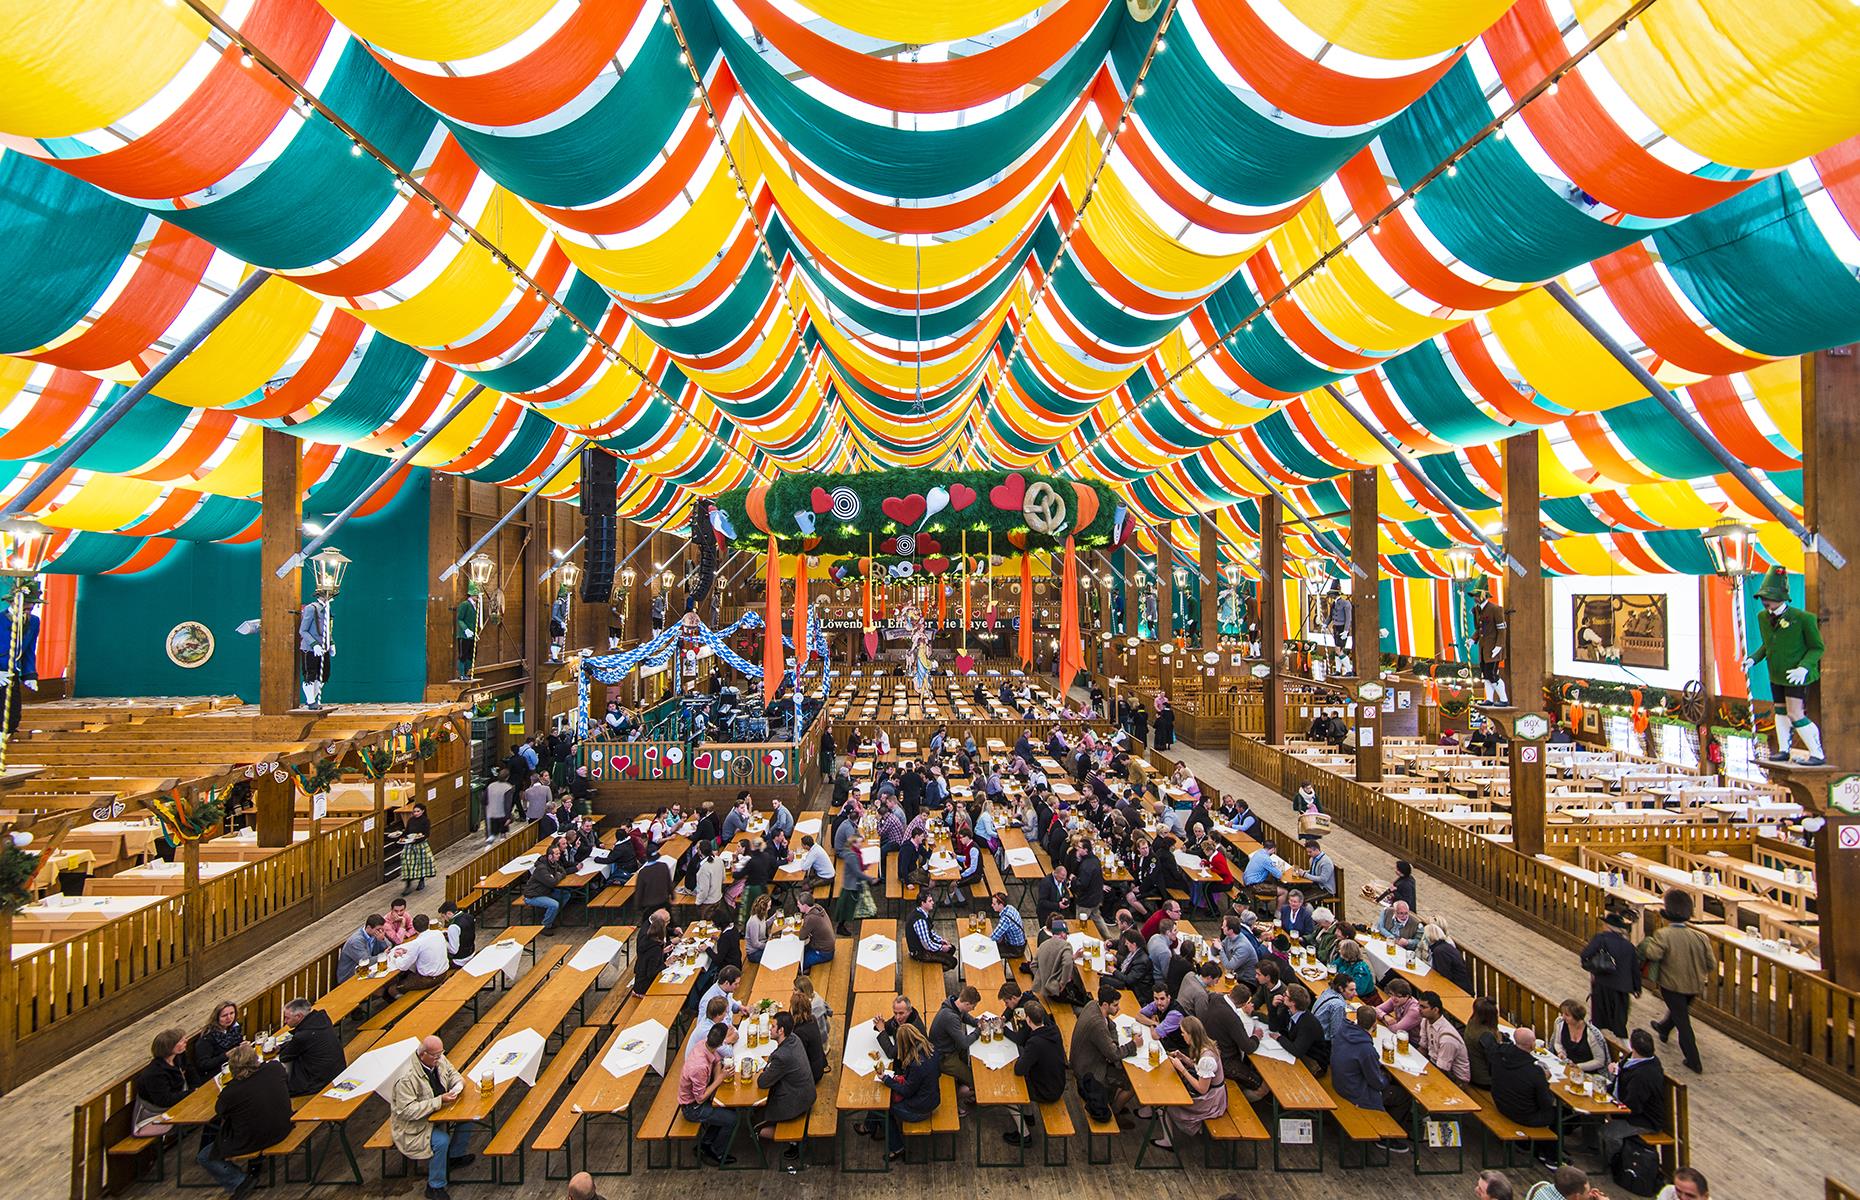 <p>Held annually in Munich, Germany, Oktoberfest is the biggest beer festival in the world. Accompanied by delicious German sausages, folk music and lots of other festivities, Oktoberfest celebrates the best of Bavarian culture.</p>  <p><a href="https://www.loveexploring.com/galleries/107826/germanys-most-historic-sights?page=1"><strong>Here are Germany's most historic sites</strong></a></p>